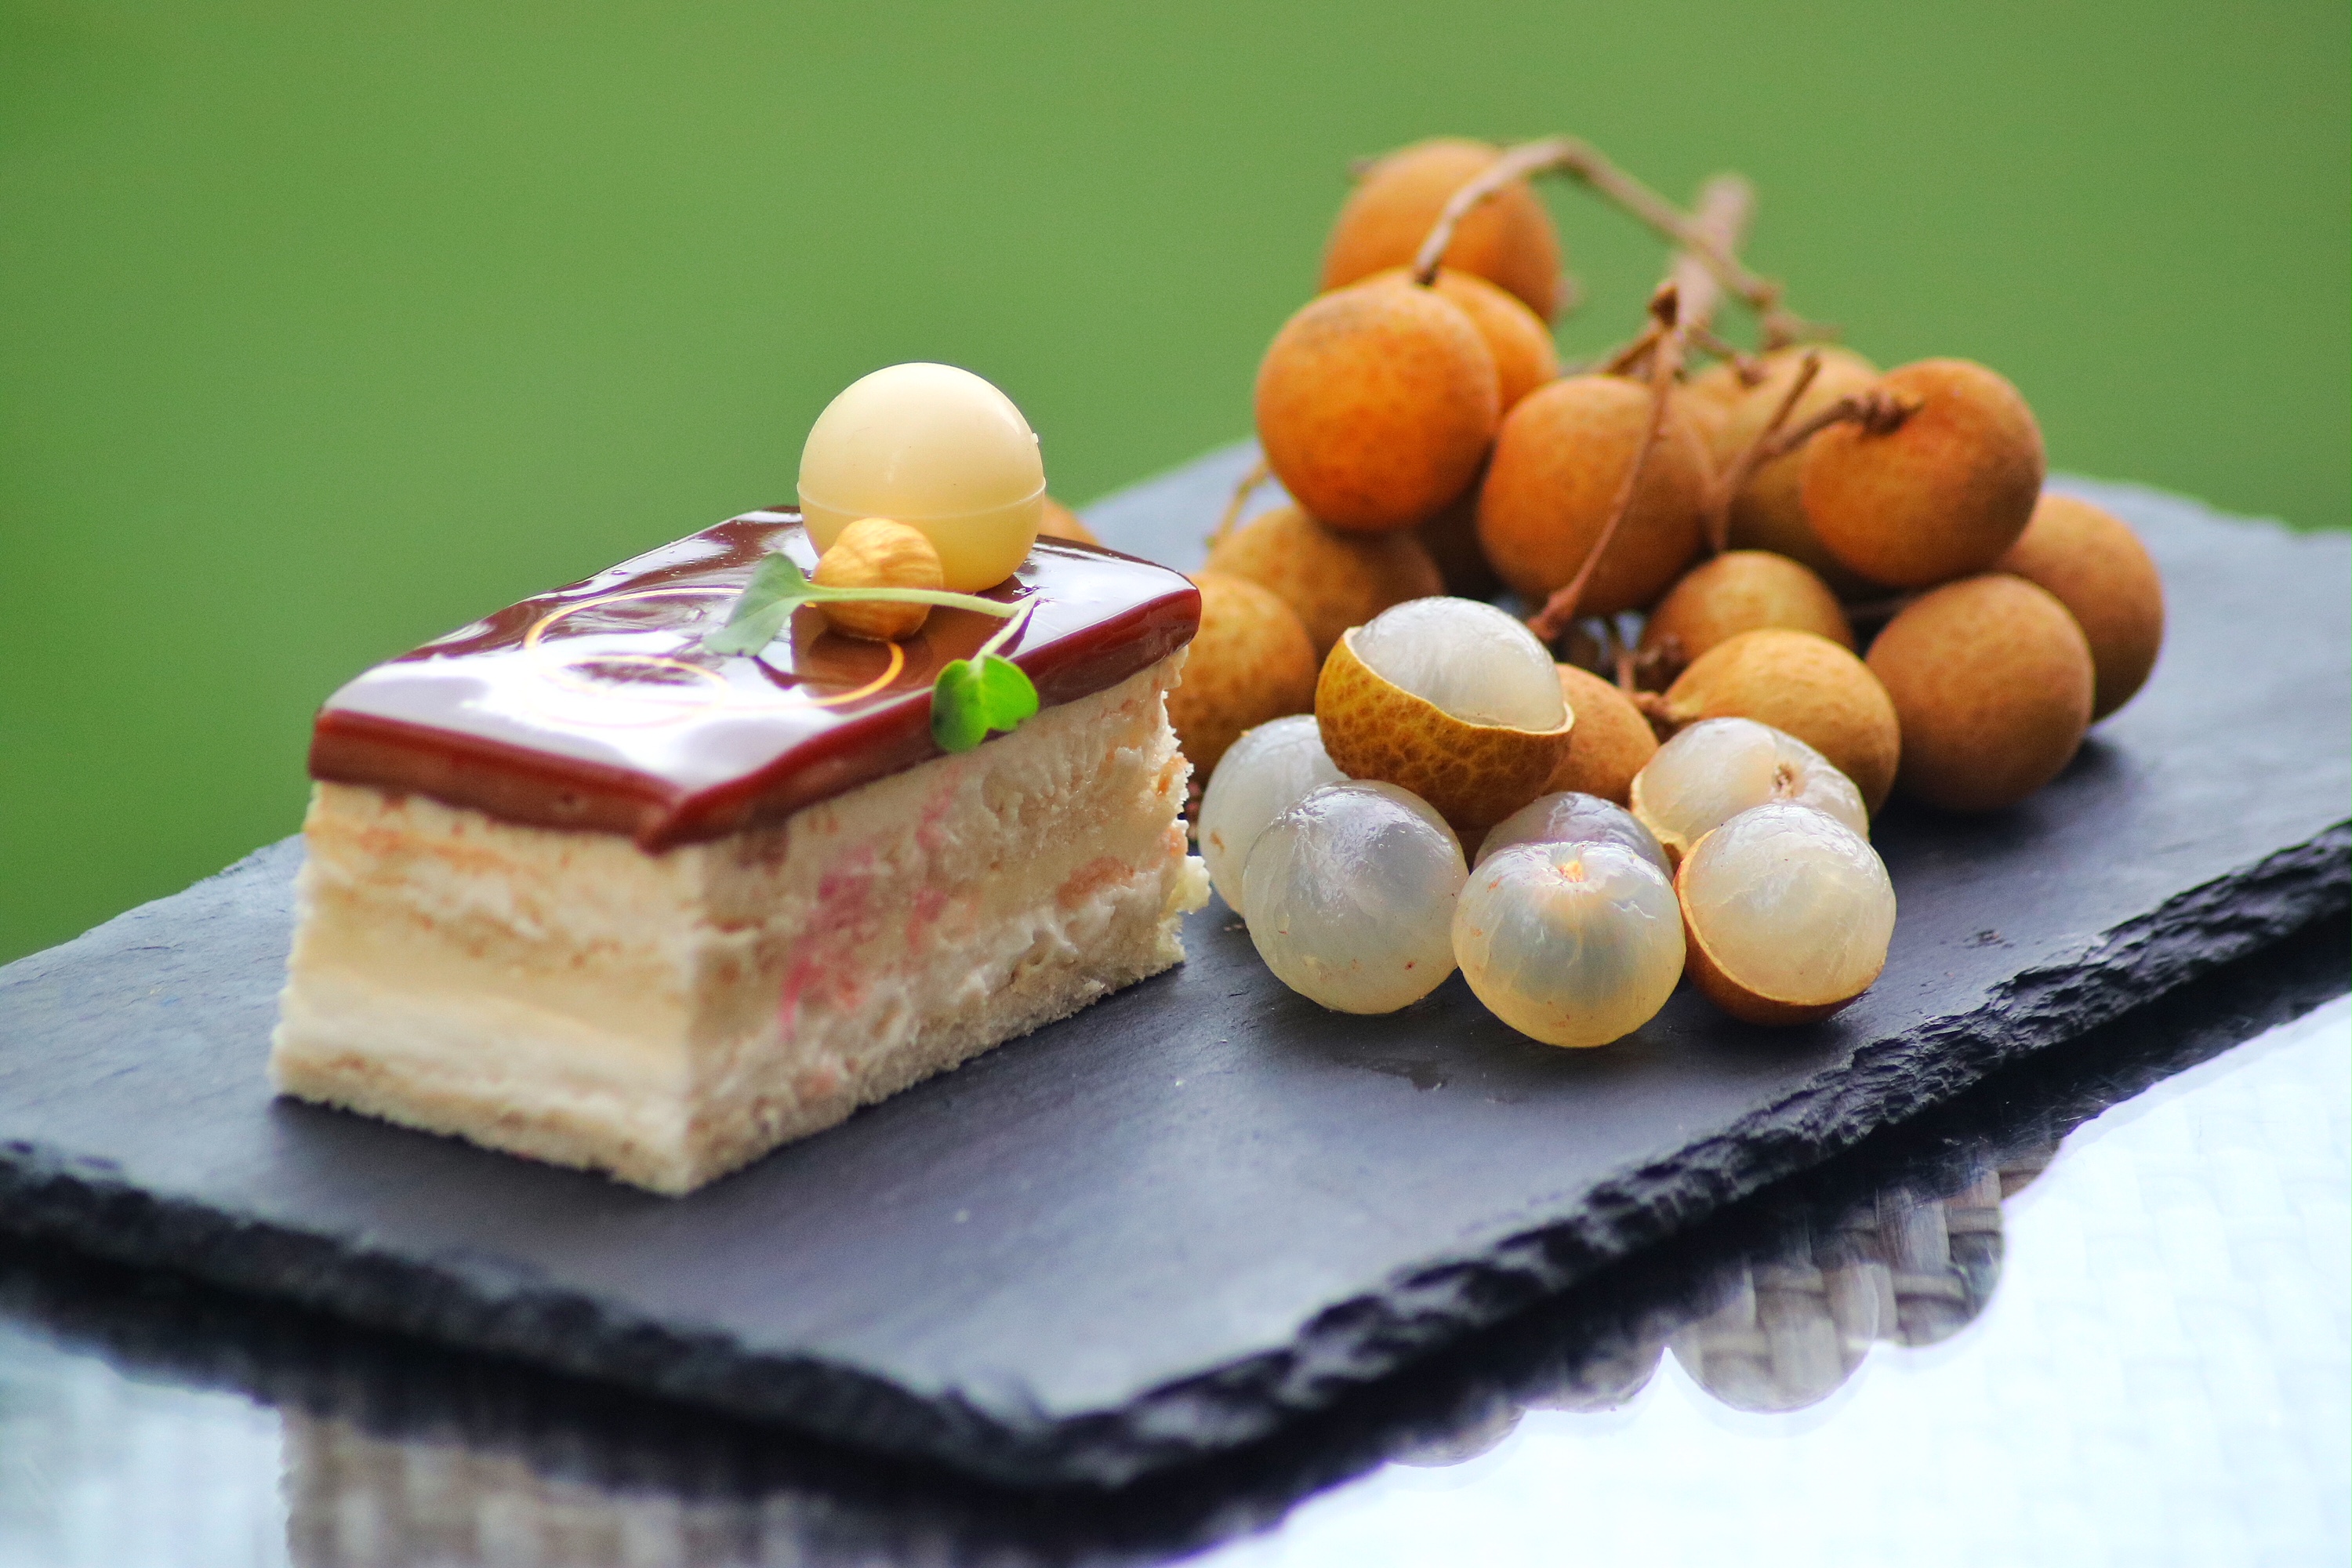 Desserts inspired by season's tropical fruits Lychee and Longan (Courtesy BBC)